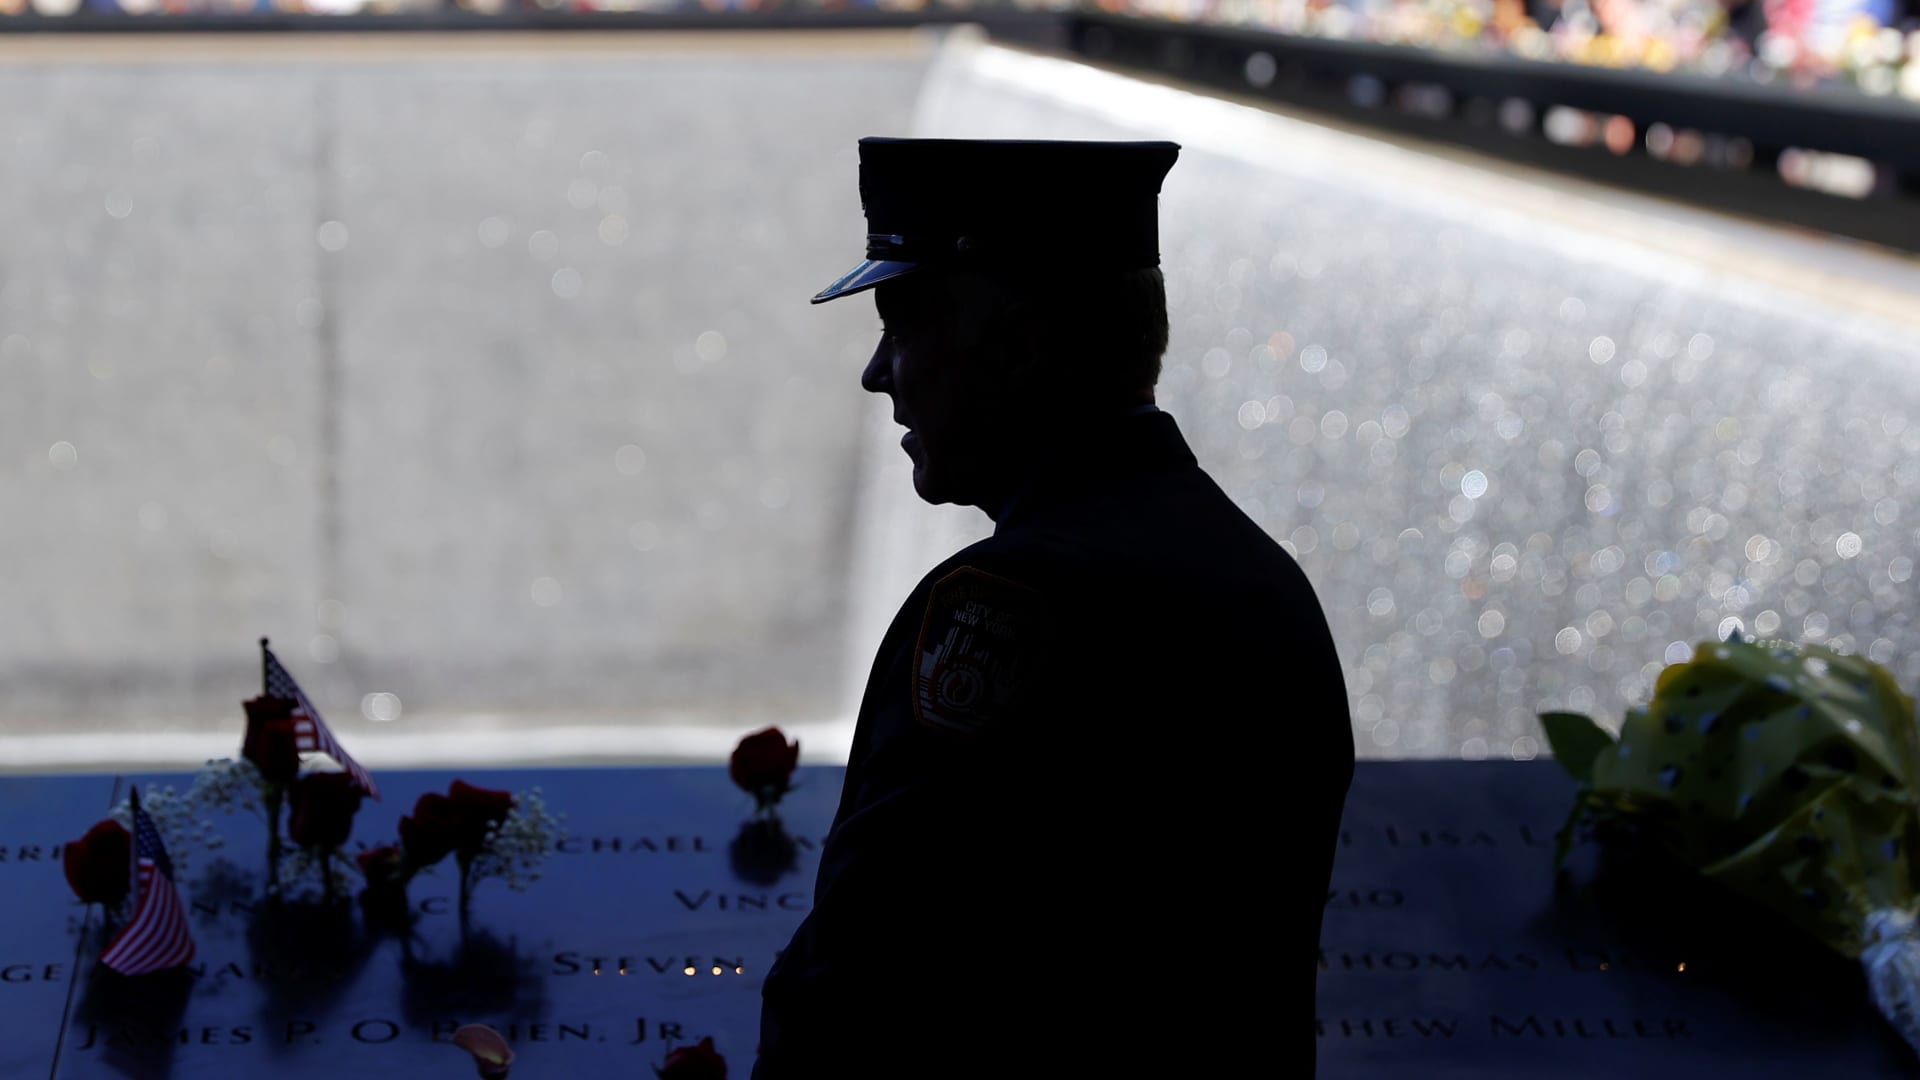 A member of the Fire Department of New York (FDNY) stands by the north reflecting pool at the 9/11 Memorial on the 20th anniversary of the September 11 attacks in Manhattan, New York City, U.S., September 11, 2021.